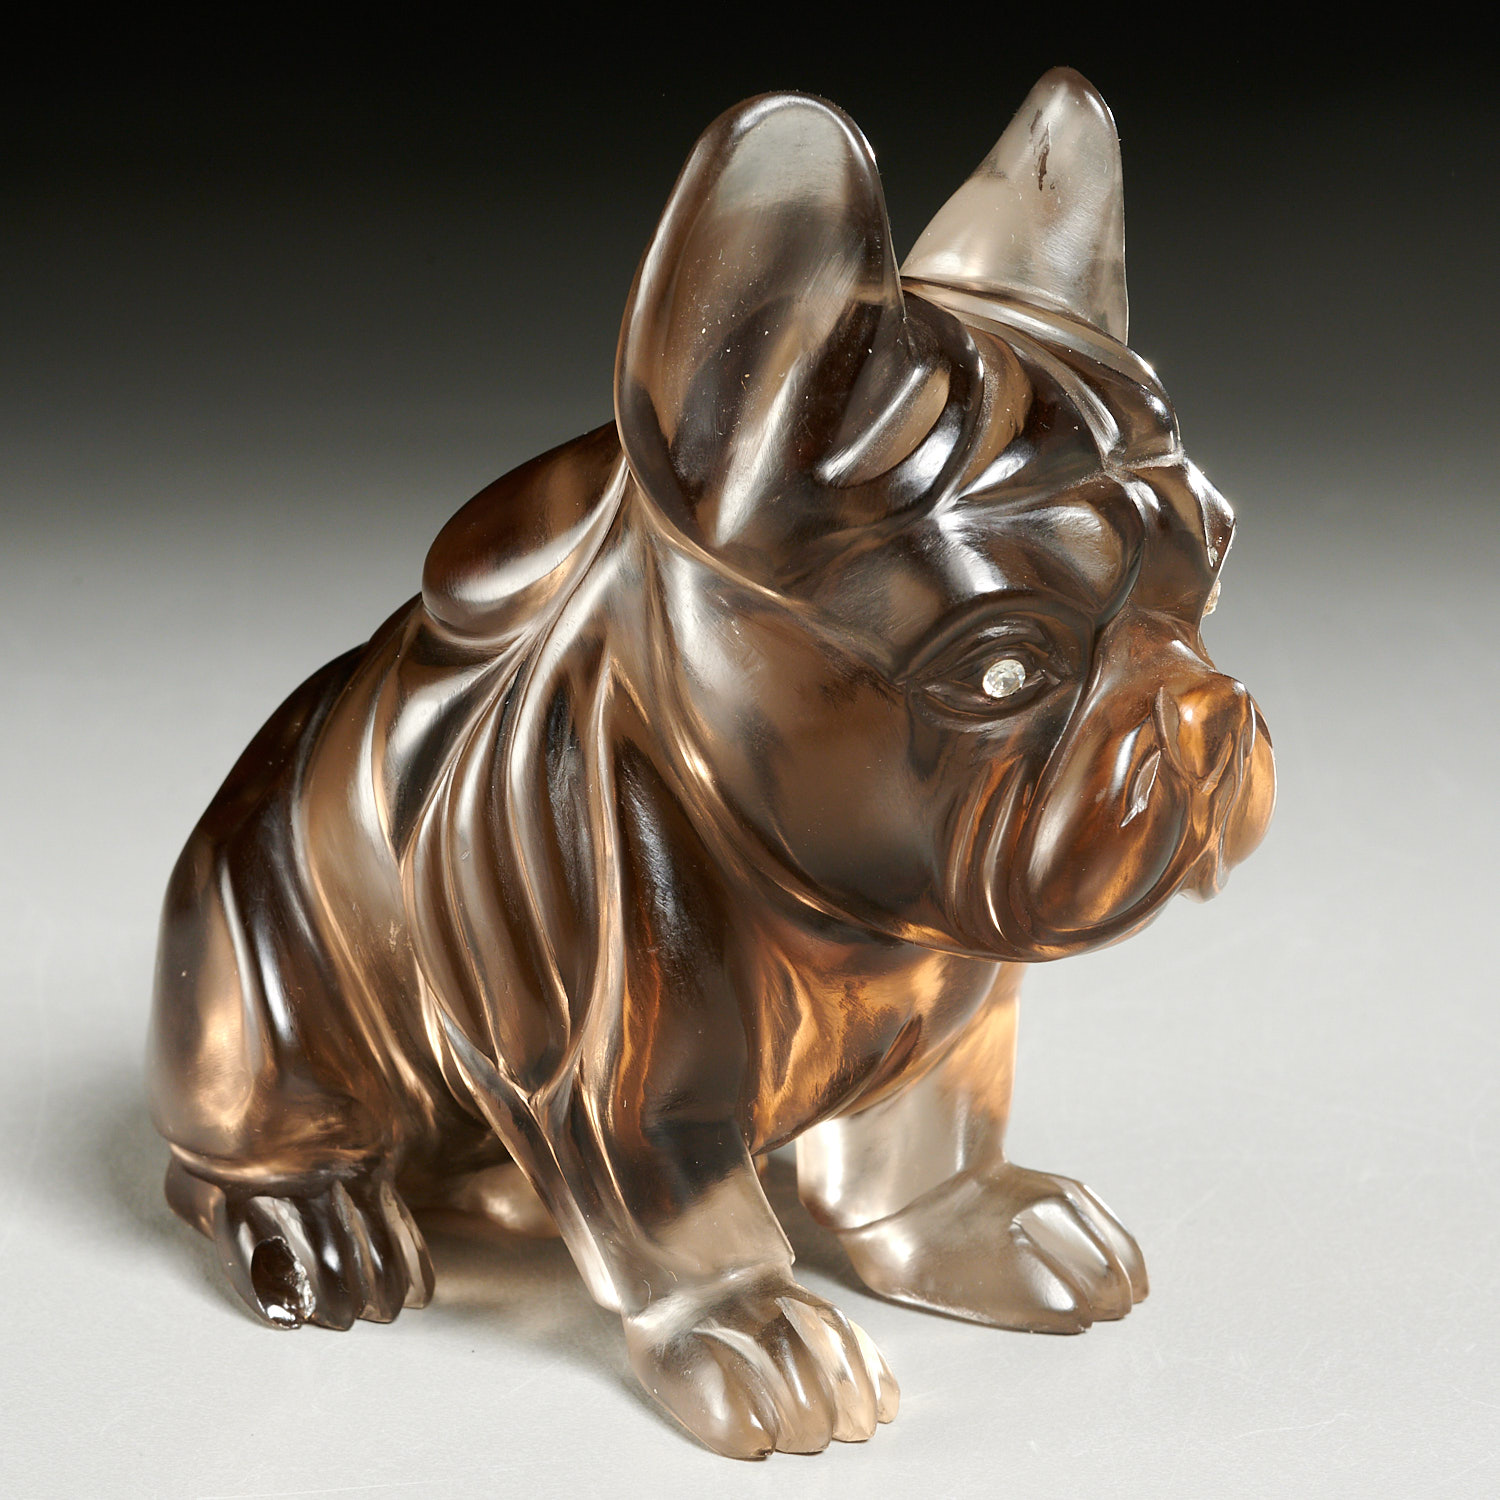 FABERGE STYLE CARVED FRENCH BULLDOG 2ce979